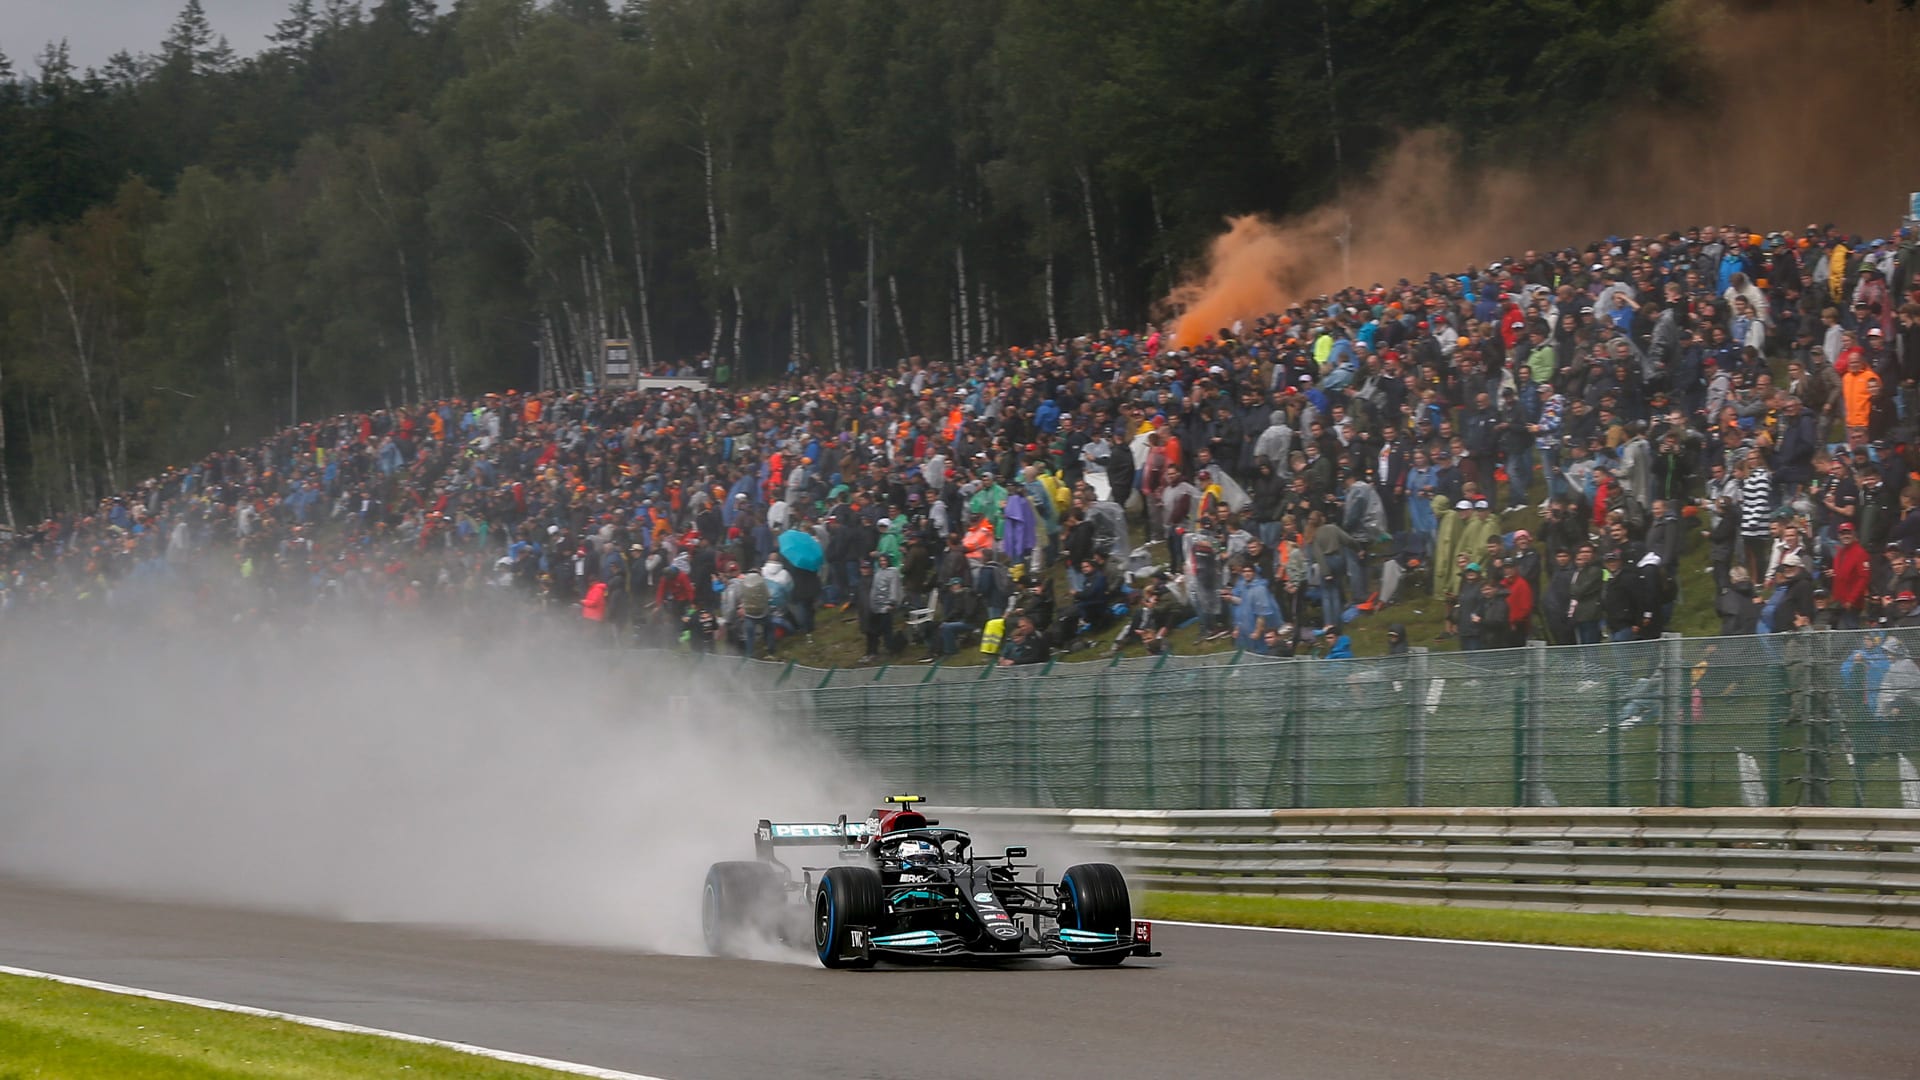 The fans have been incredible today says Hamilton after rained-off Belgian Grand Prix Formula 1®